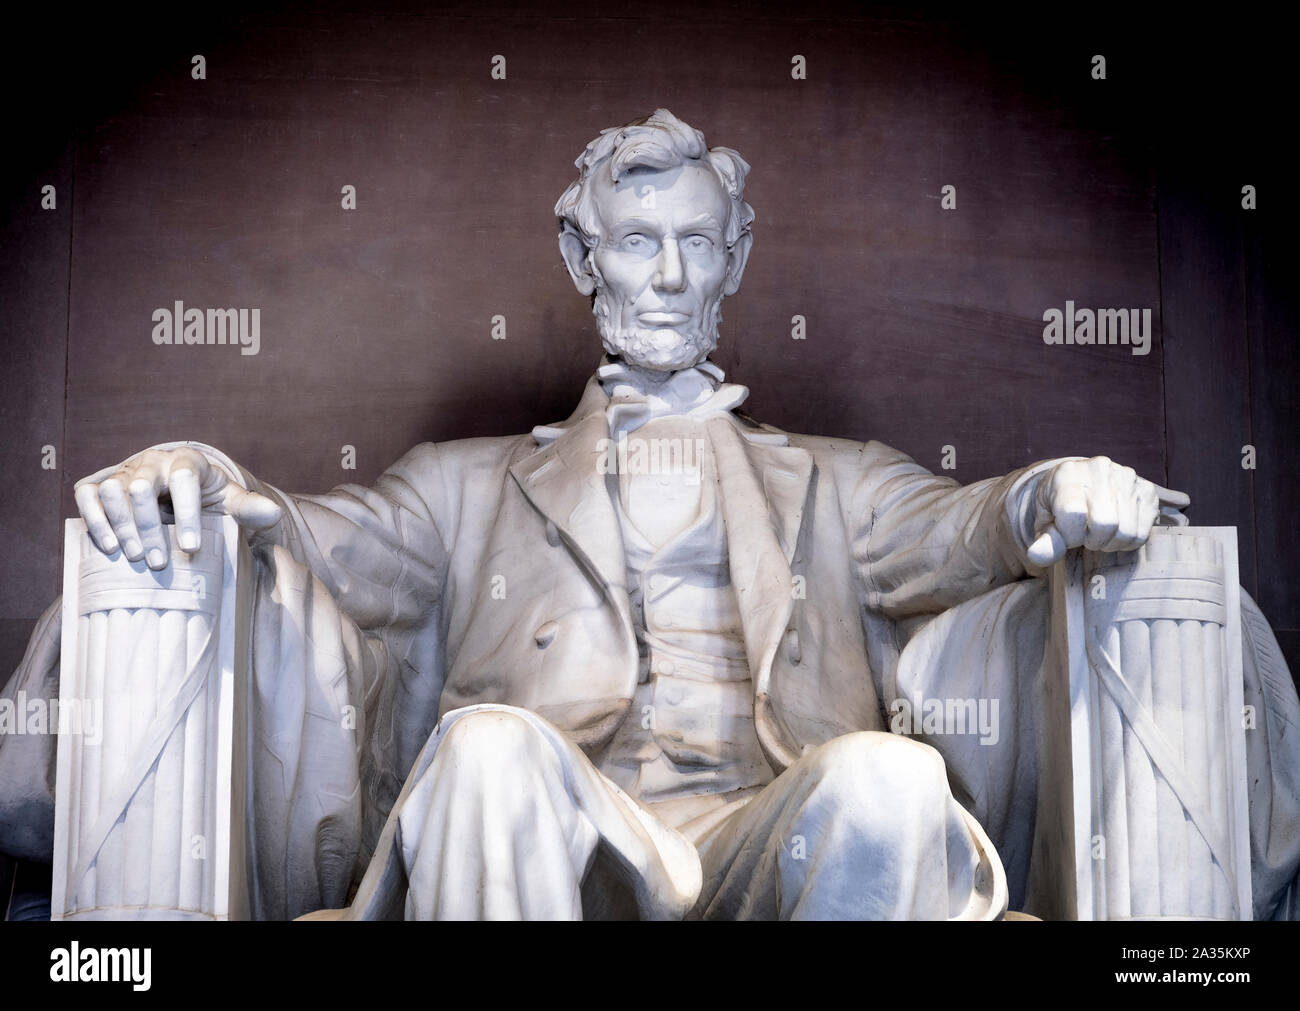 Statue of Abraham Lincoln, Inside the Lincoln Memorial, National Mall, Washington DC, USA Stock Photo